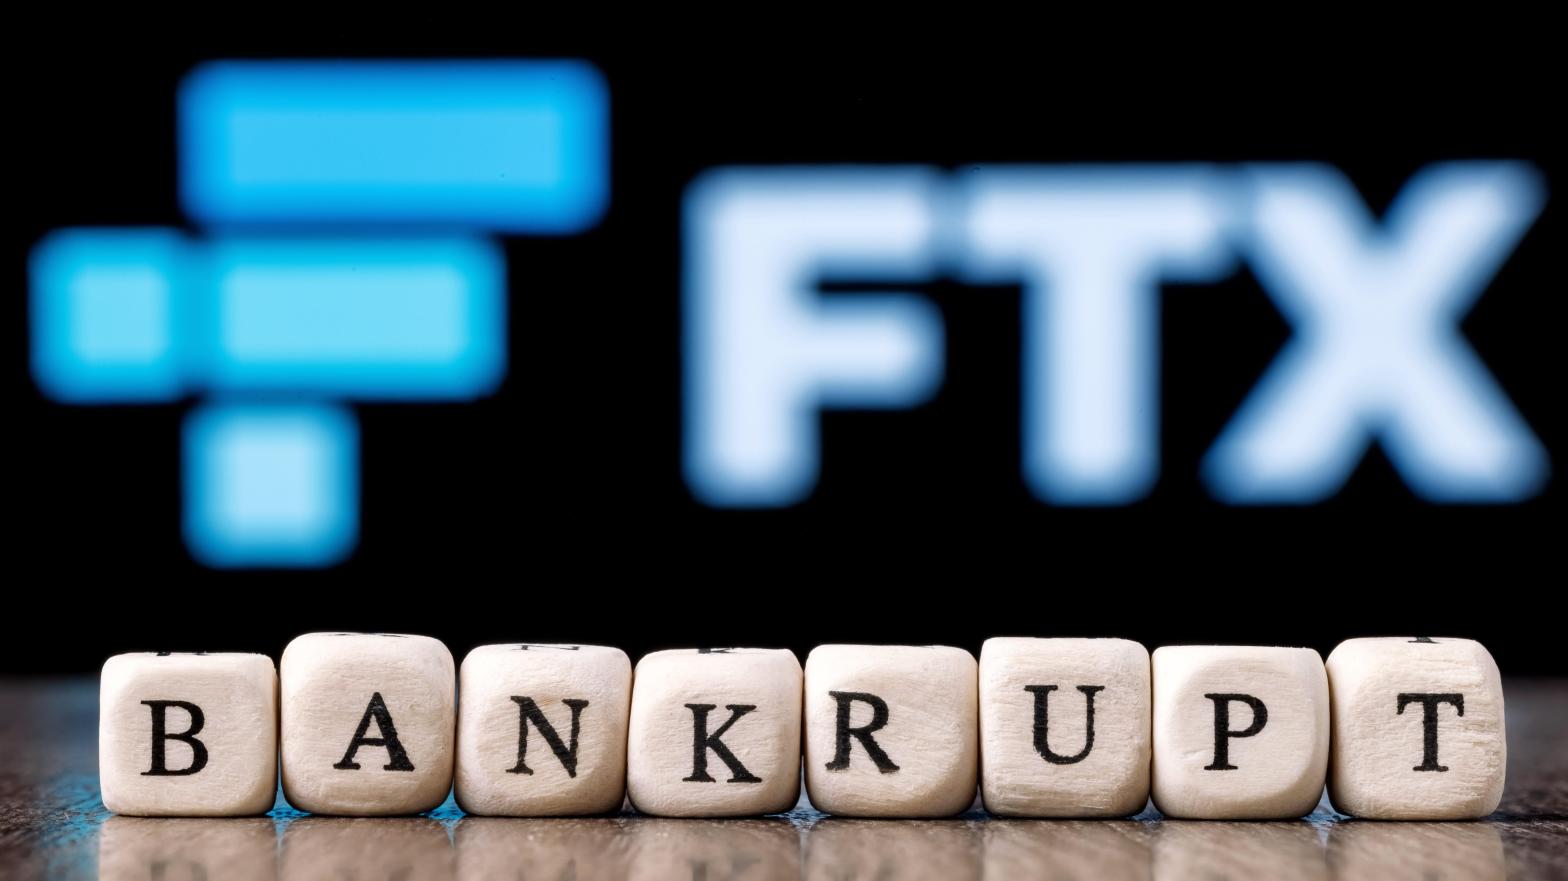 John J. Ray III, the new FTX CEO in charge of handling the company's bankruptcy, wrote this was the one of the worst cases he's had to struggle through, calling it 'a complete failure of corporate controls.' (Photo: Sergei Elagin, Shutterstock)